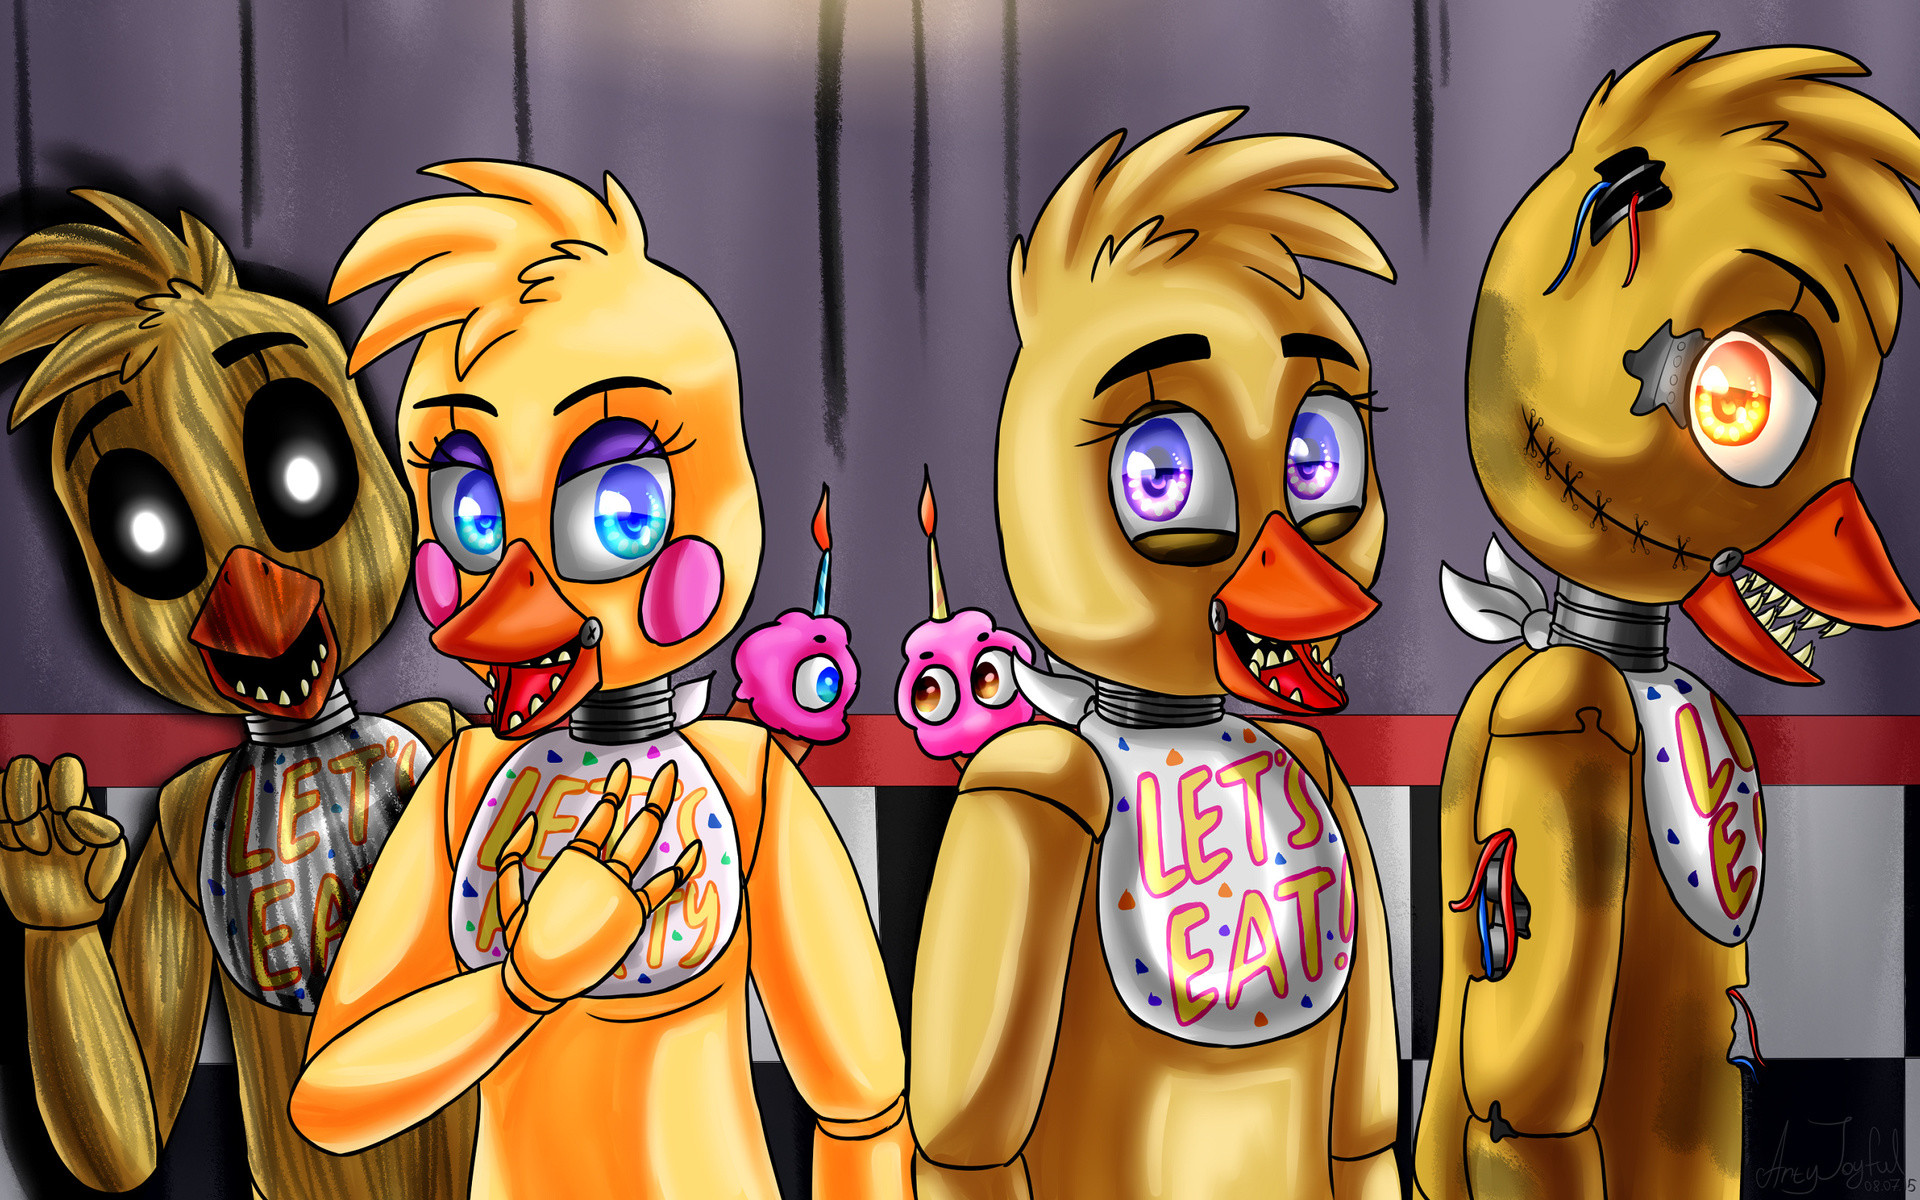 Fnaf Chica, Five Nights At Freddys, Chica, Five Nights At Freddys